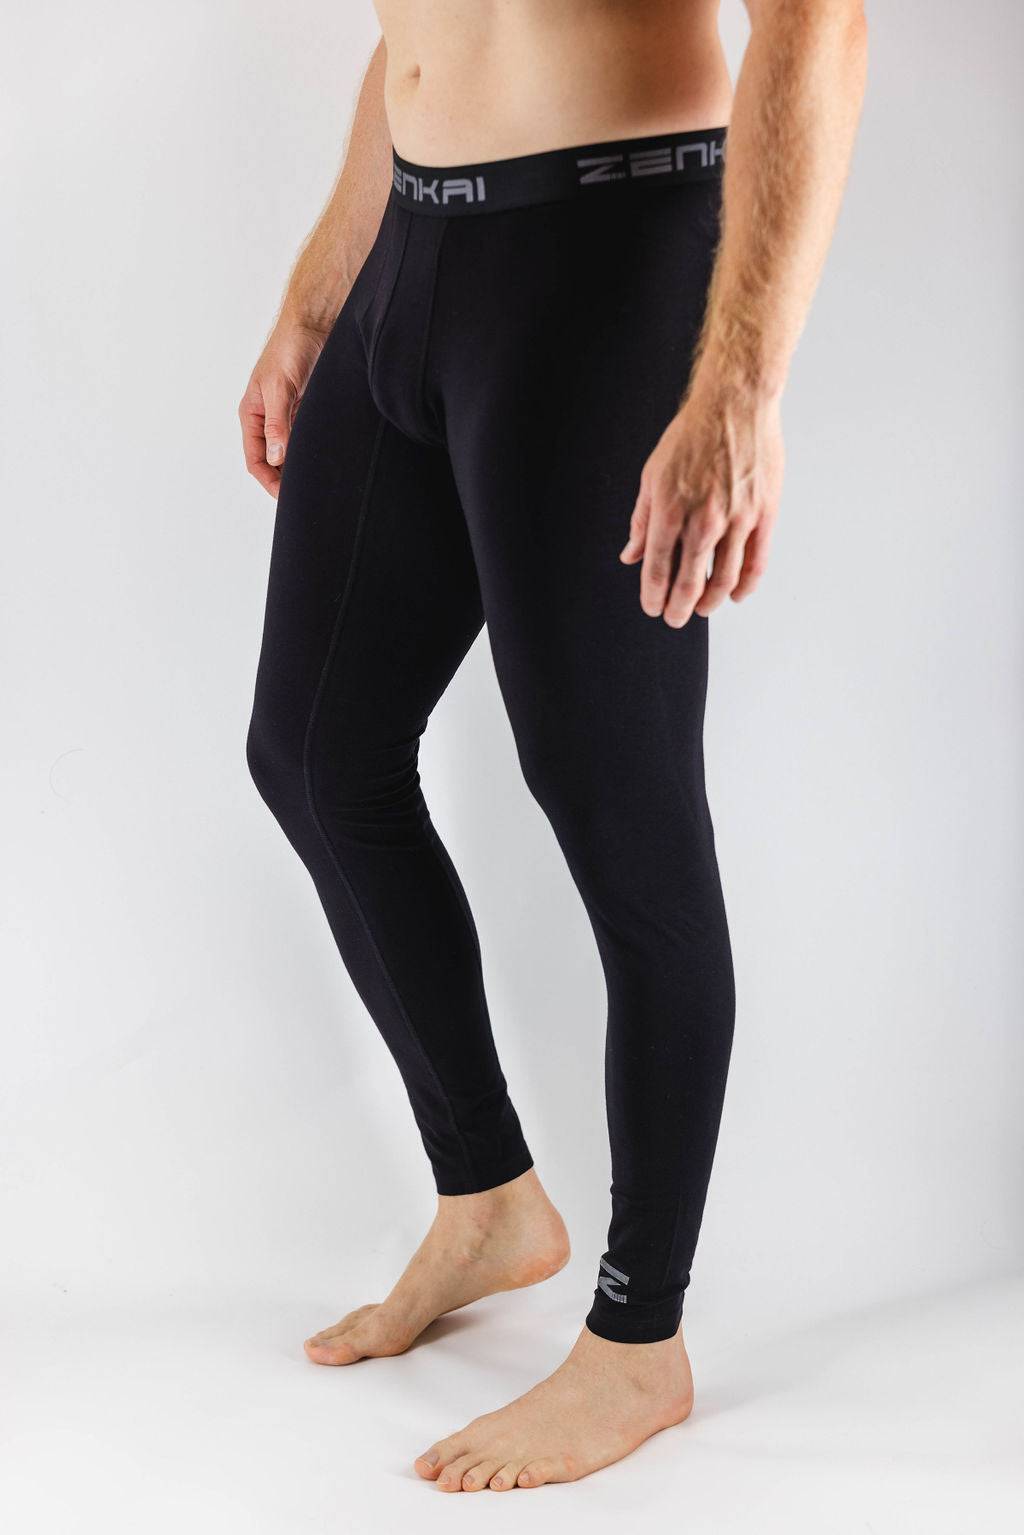 NEW Bare Basic Under, NEW Mystic Under, NEW Hero Pouch Sport Tight